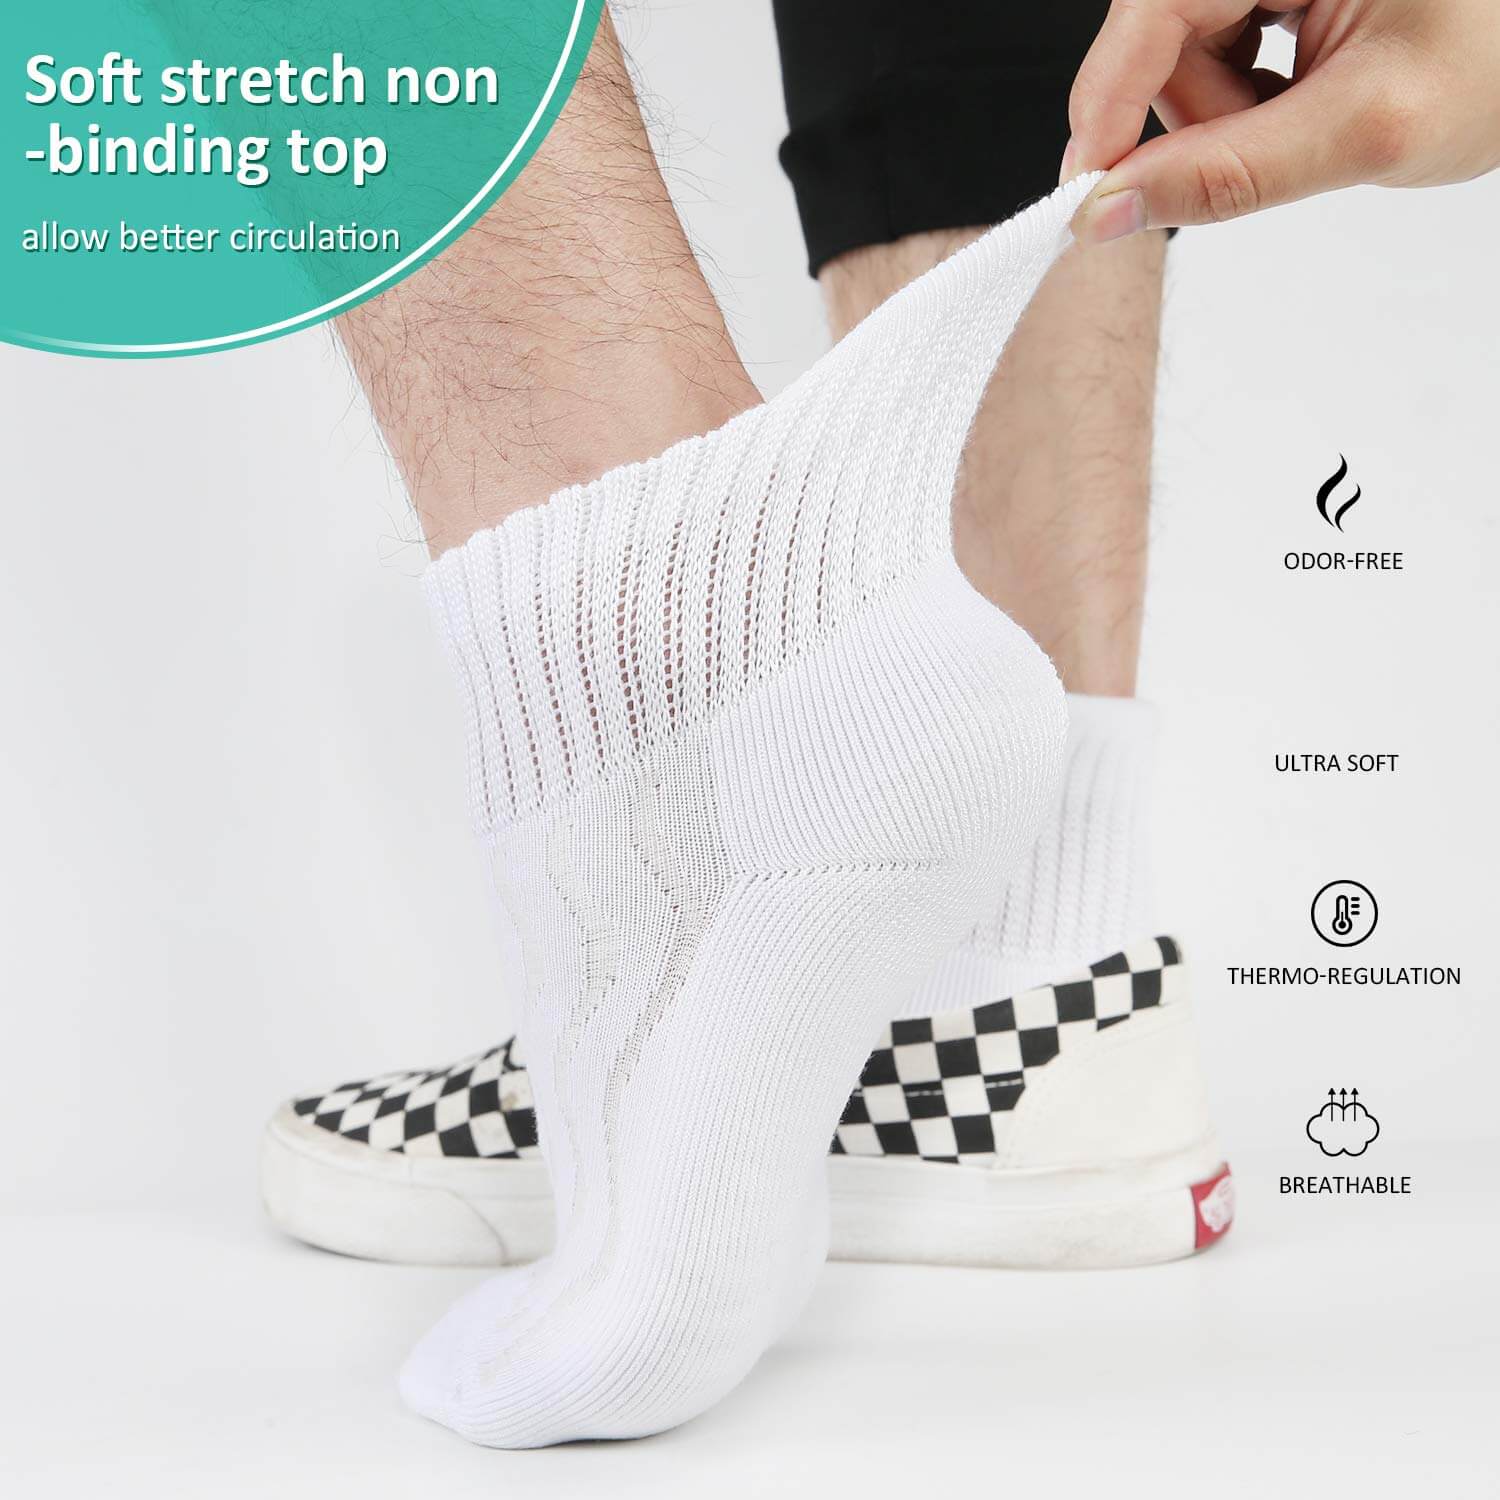 Wide non-binding Bamboo diabetic socks, seamless toe, air vent with cushion sole, 6 pairs - md-diab